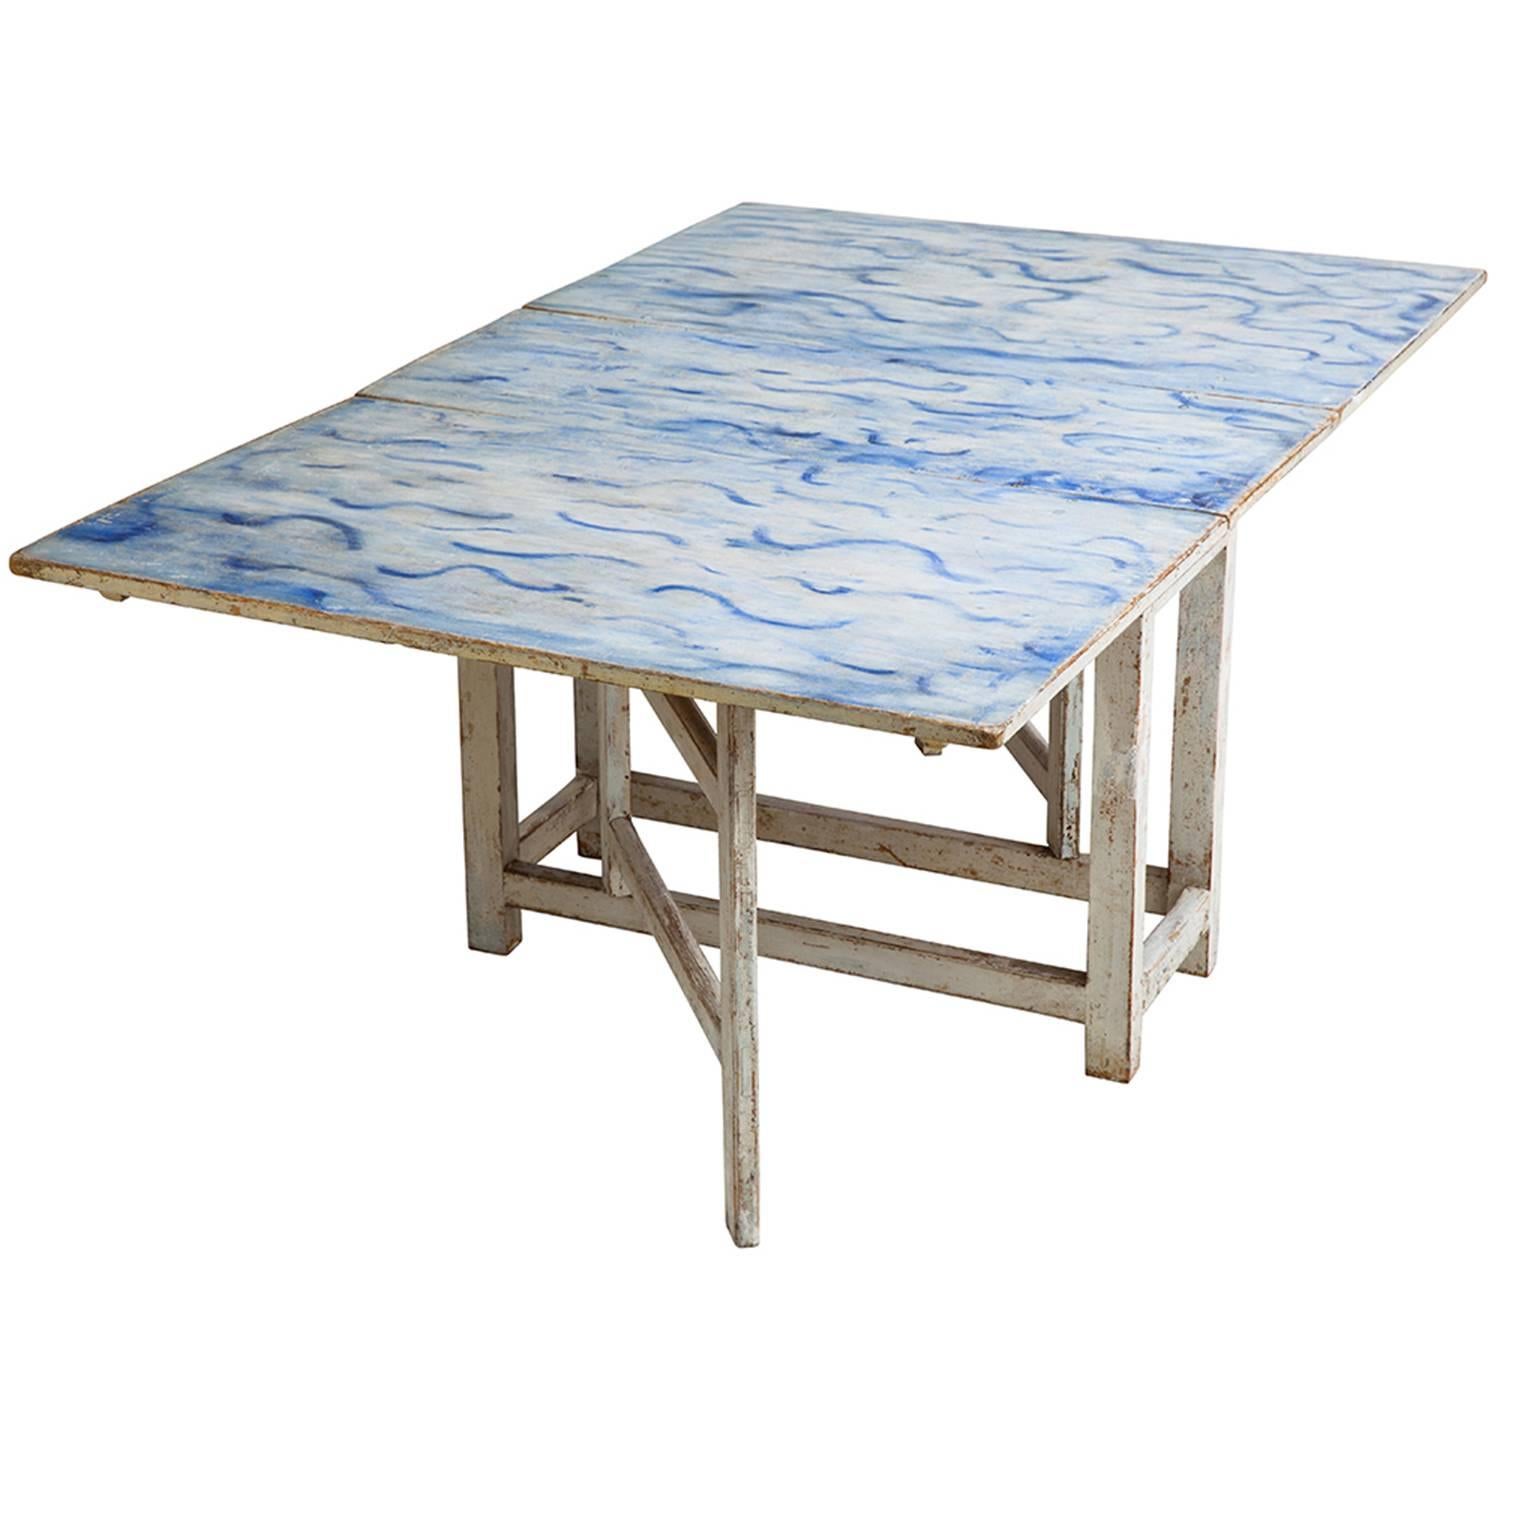 Swedish Blue and White Original Painted Drop-Leaf Table, circa 1820